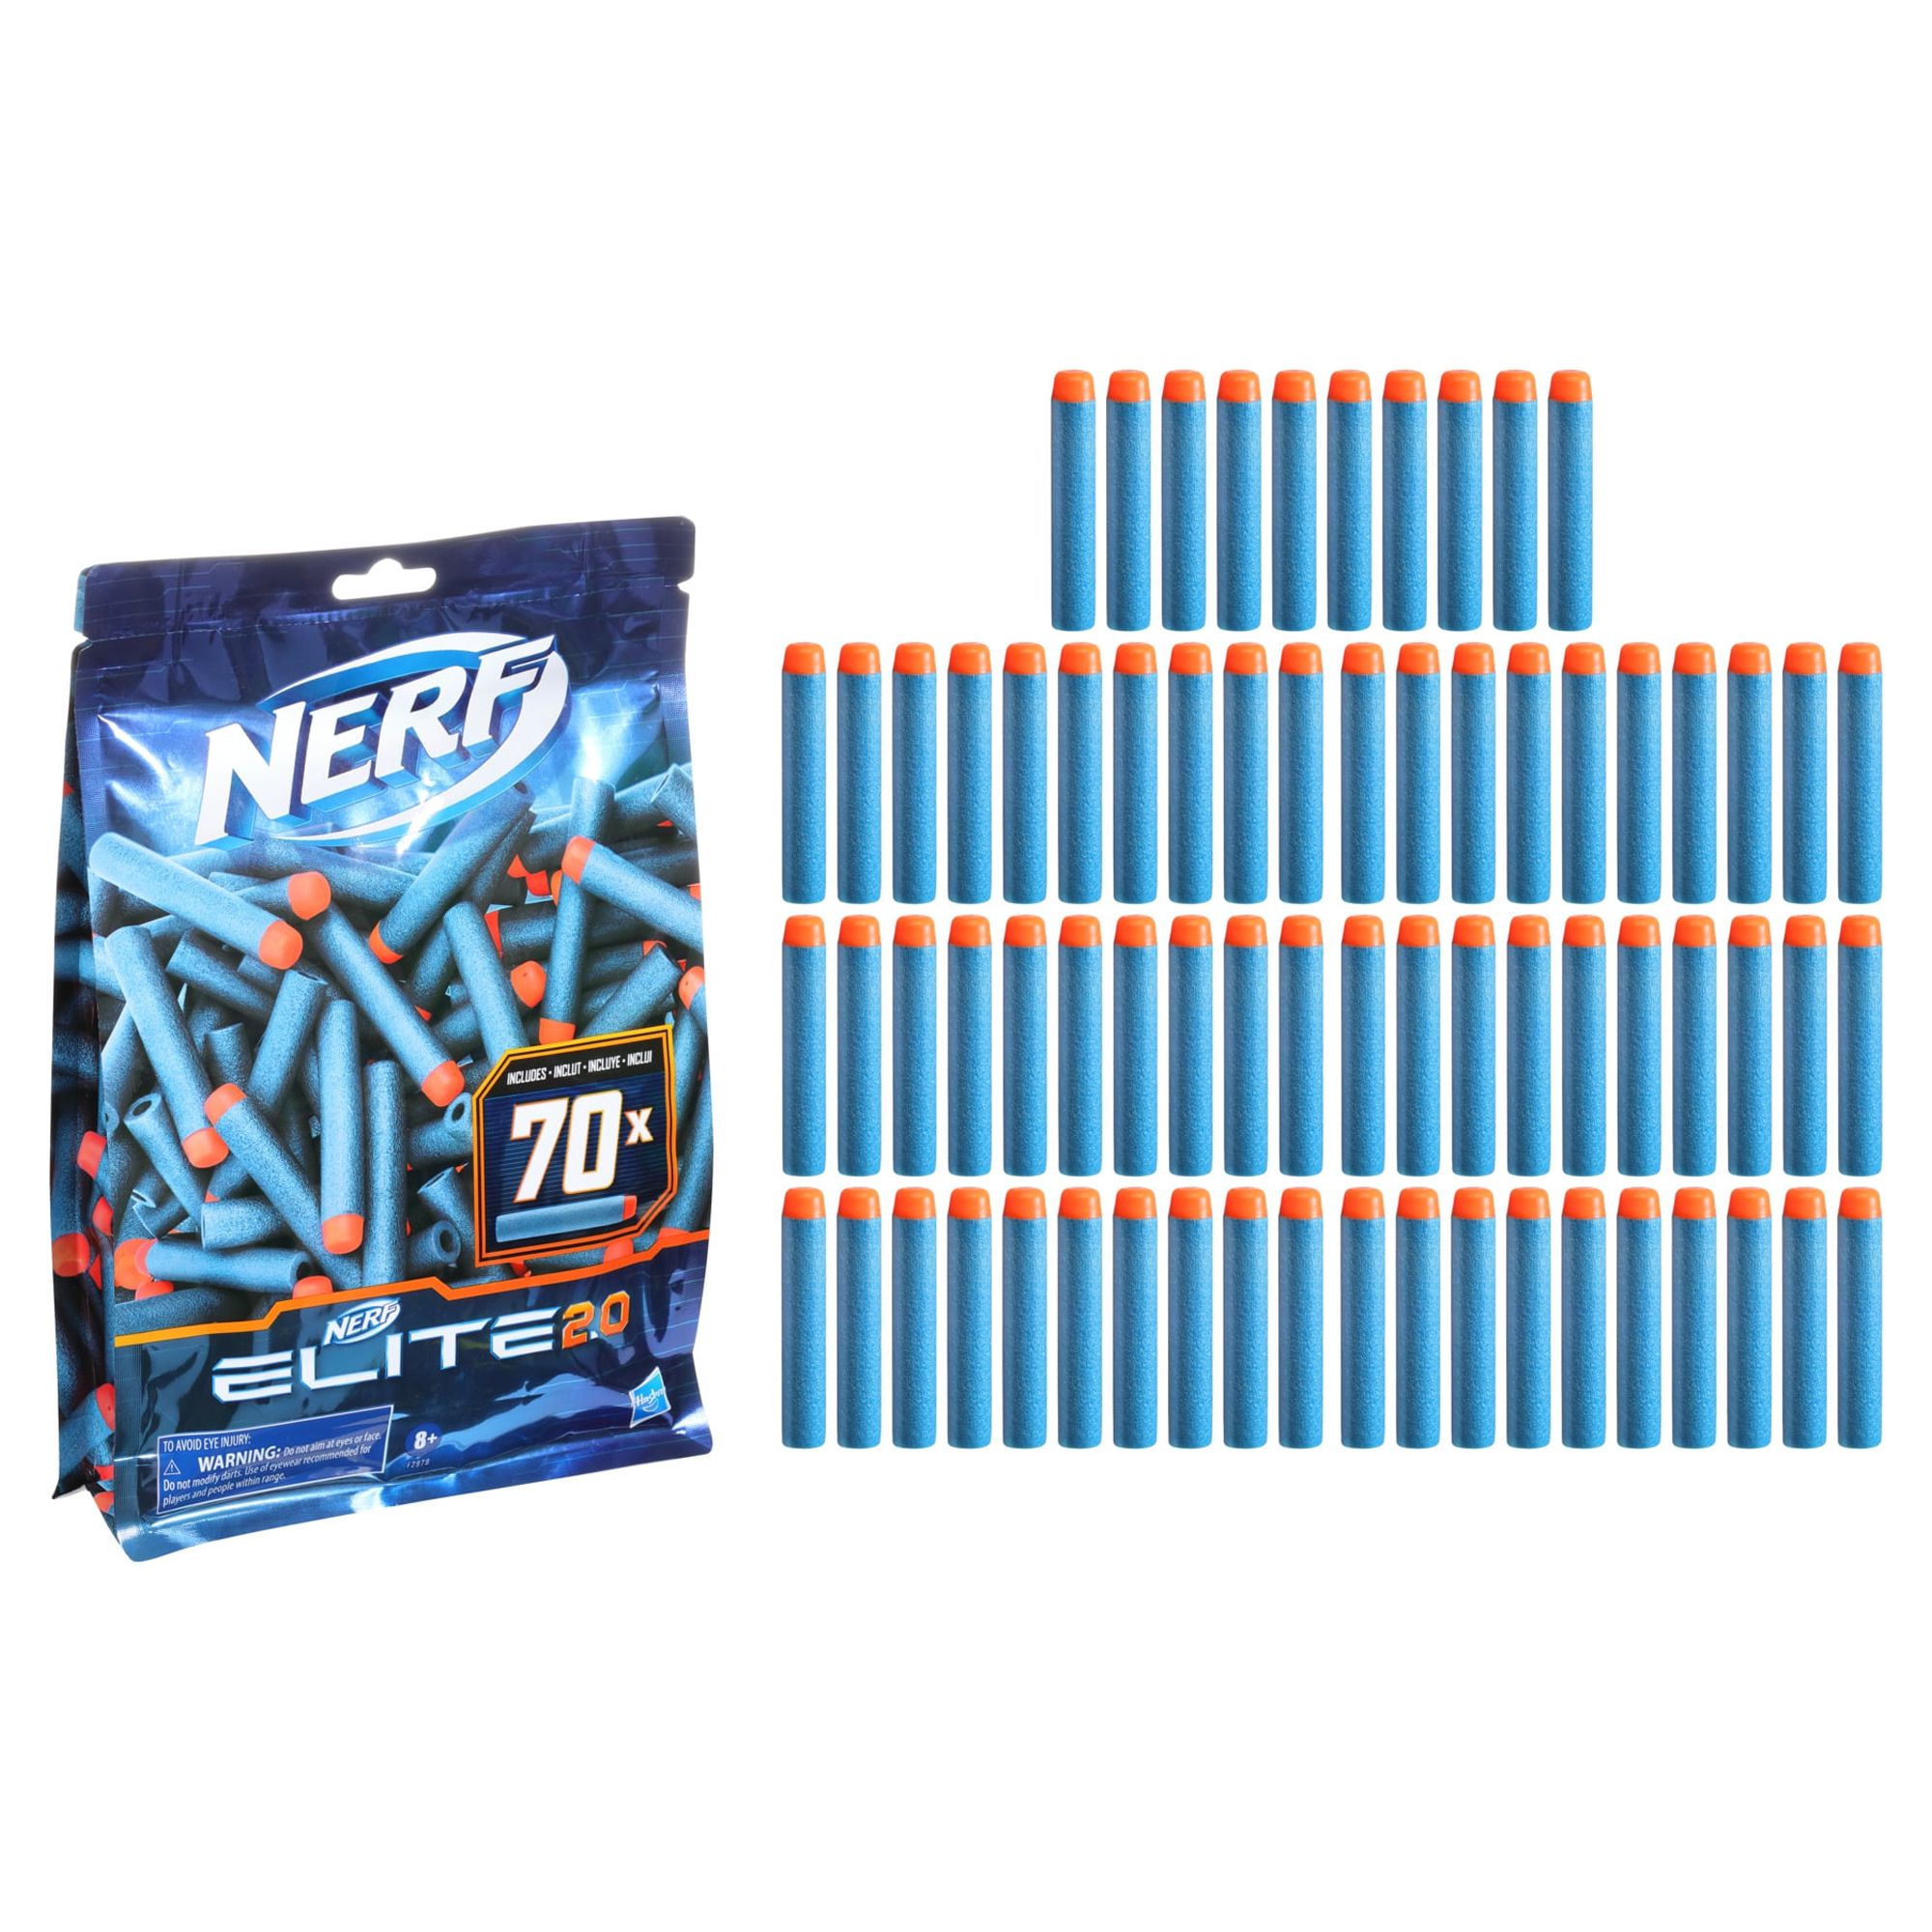 Nerf Elite 2.0 Kids Toy Blaster Refill Pack with 70 Darts, Only At Walmart - image 1 of 4